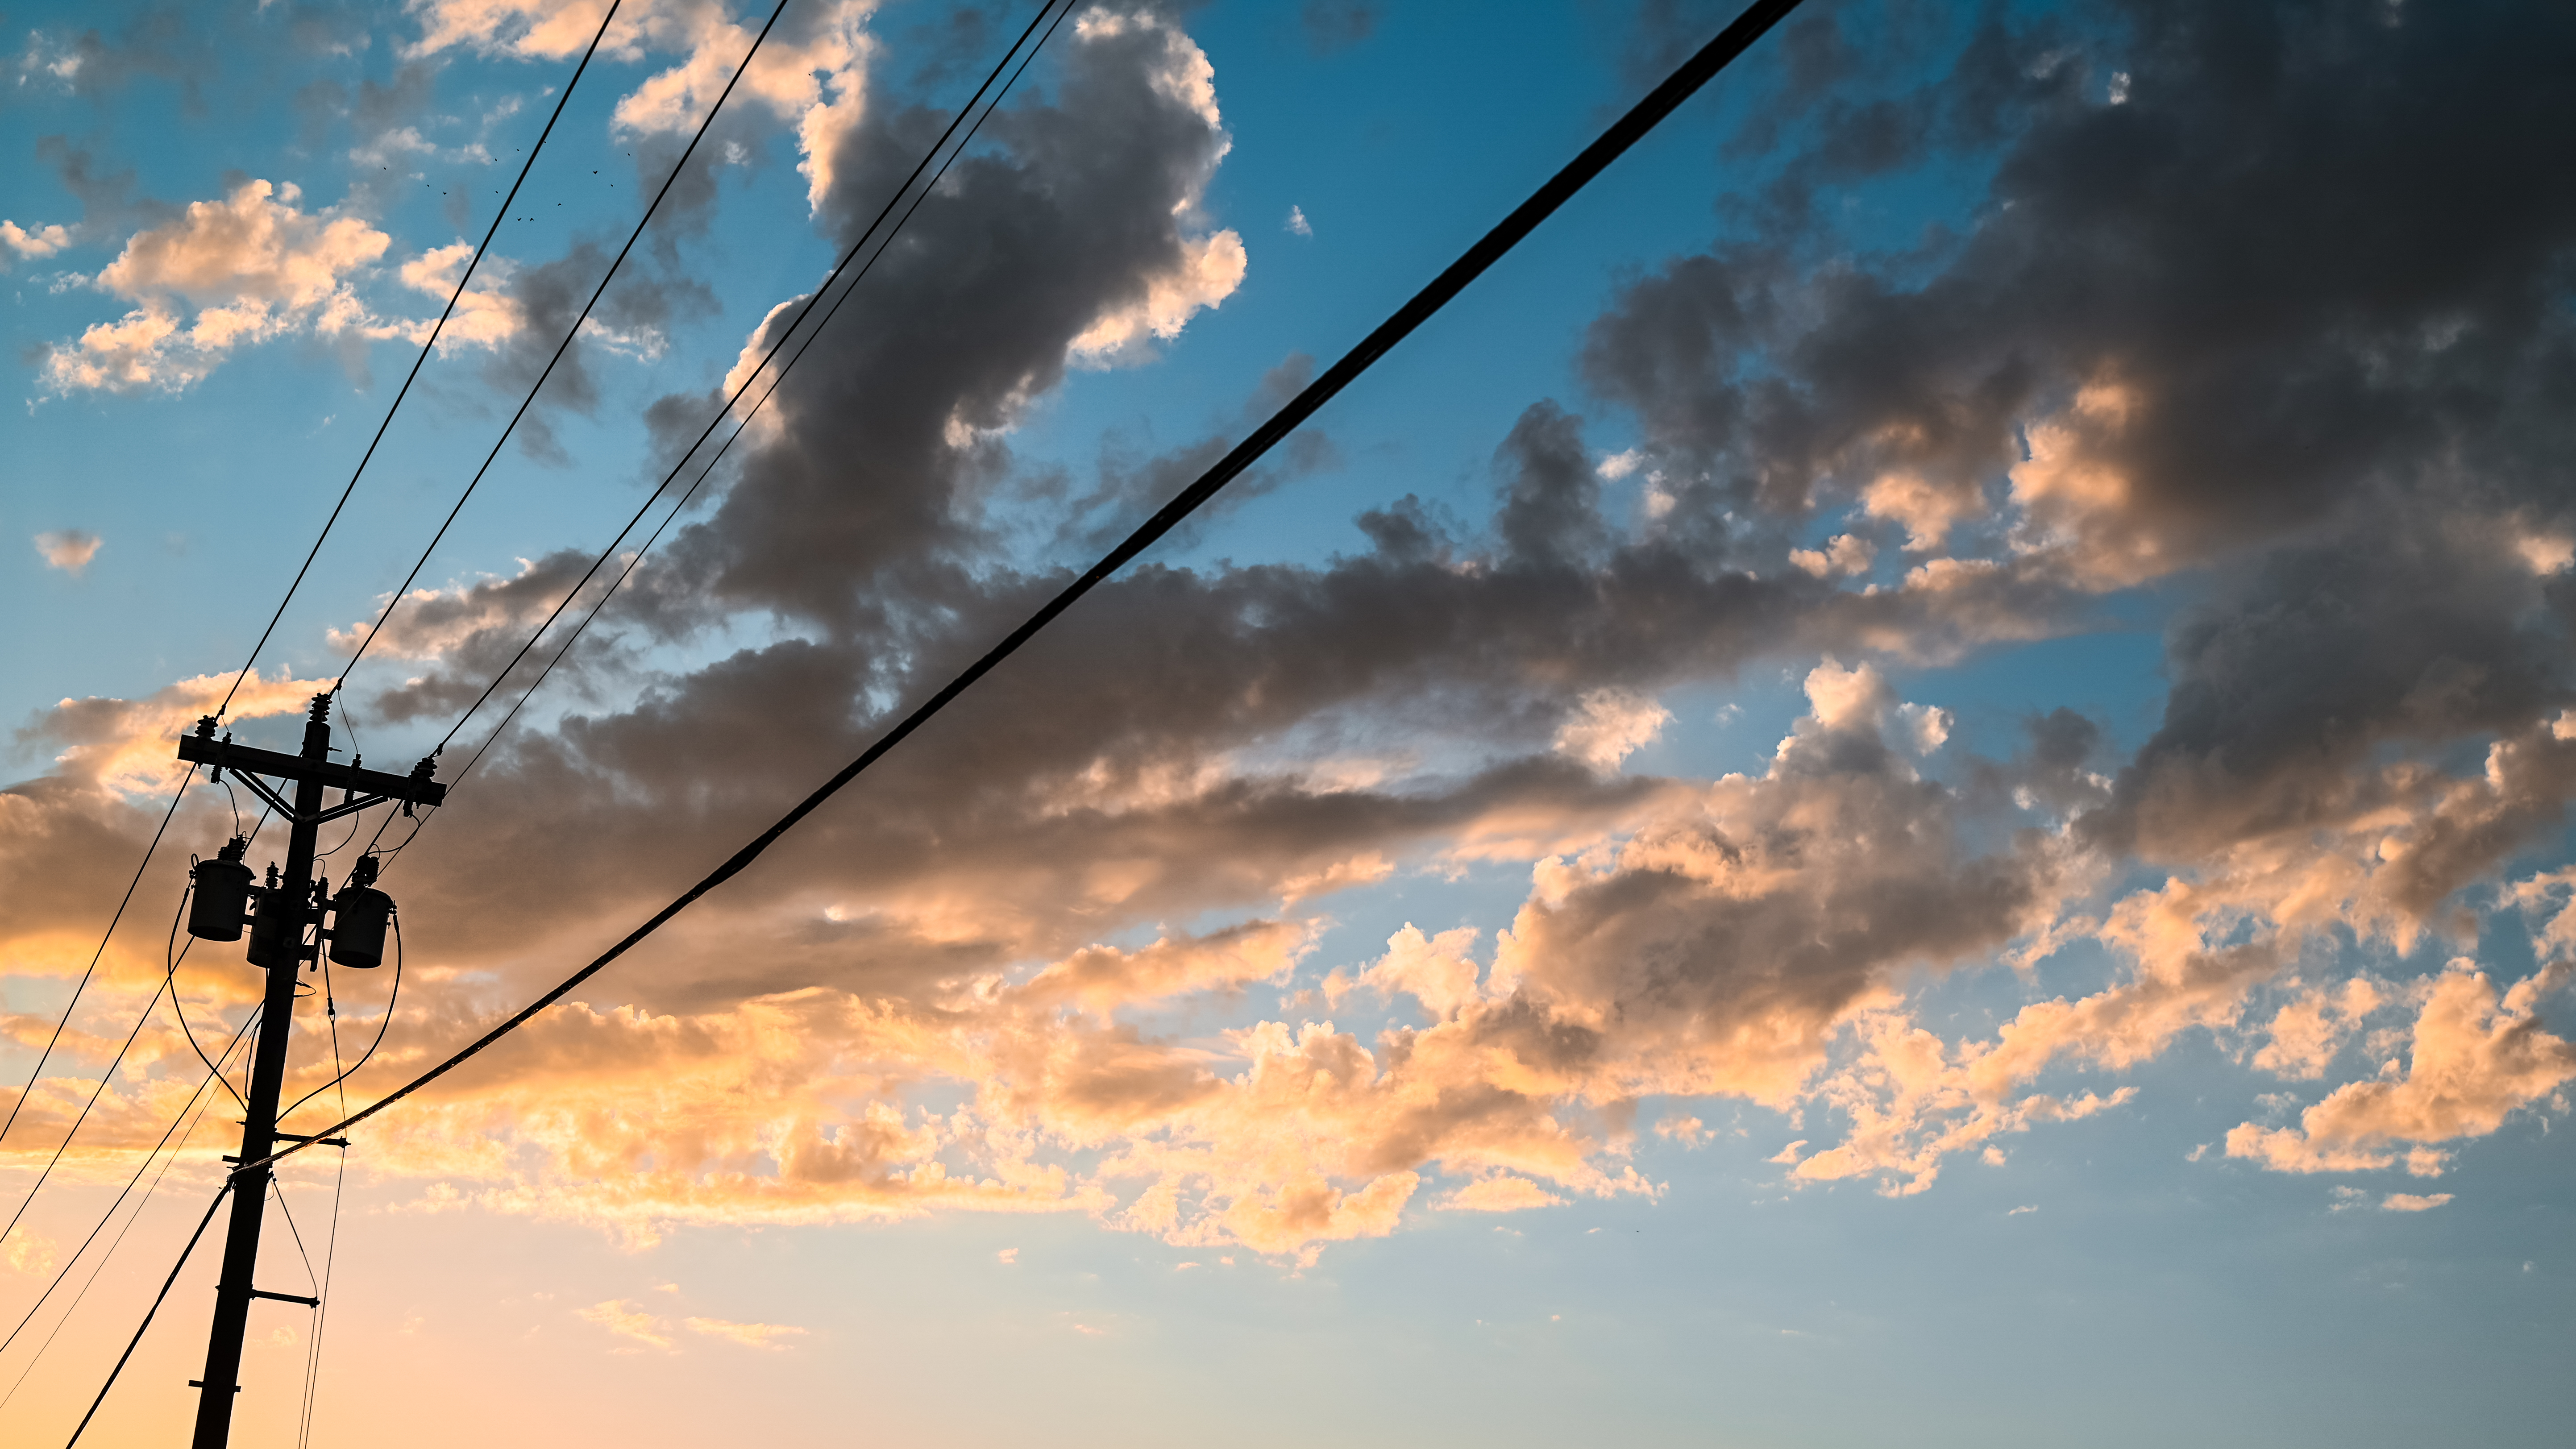 Nature Clouds Sunset Landscape Powerlines Photography Texas 5772x3247